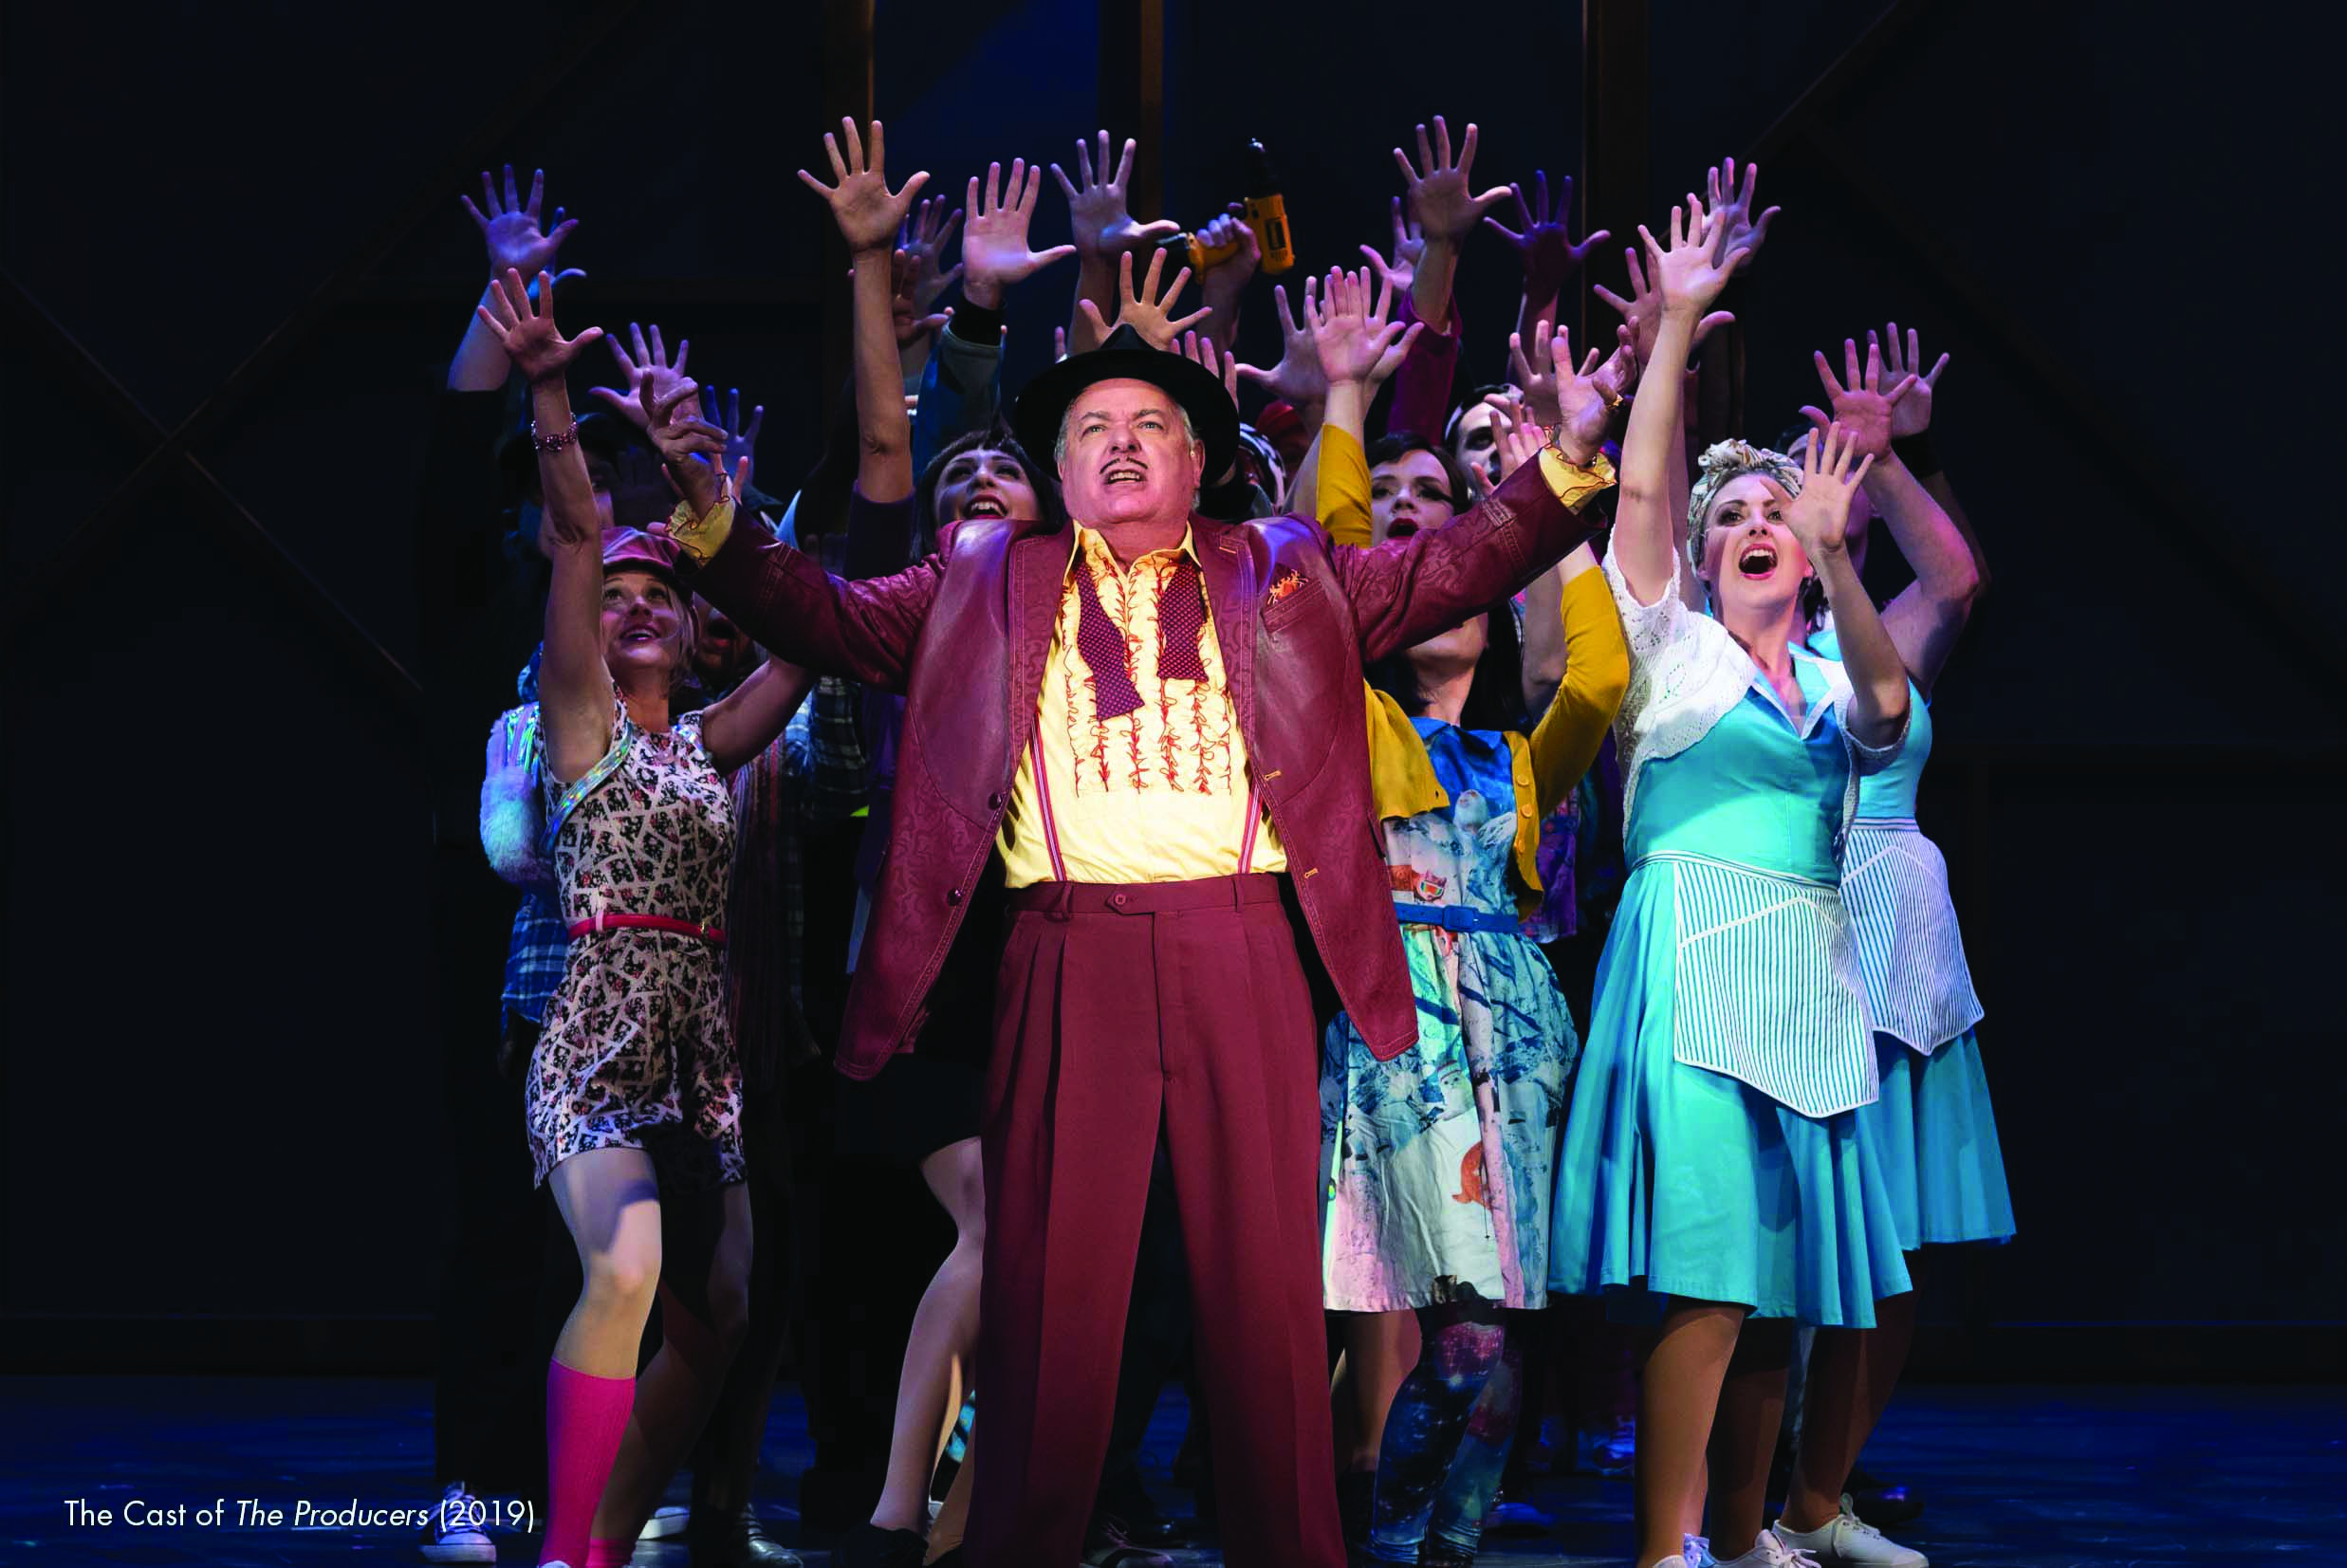 Michael Poisson (center) and the 2019 cast of "The Producers"